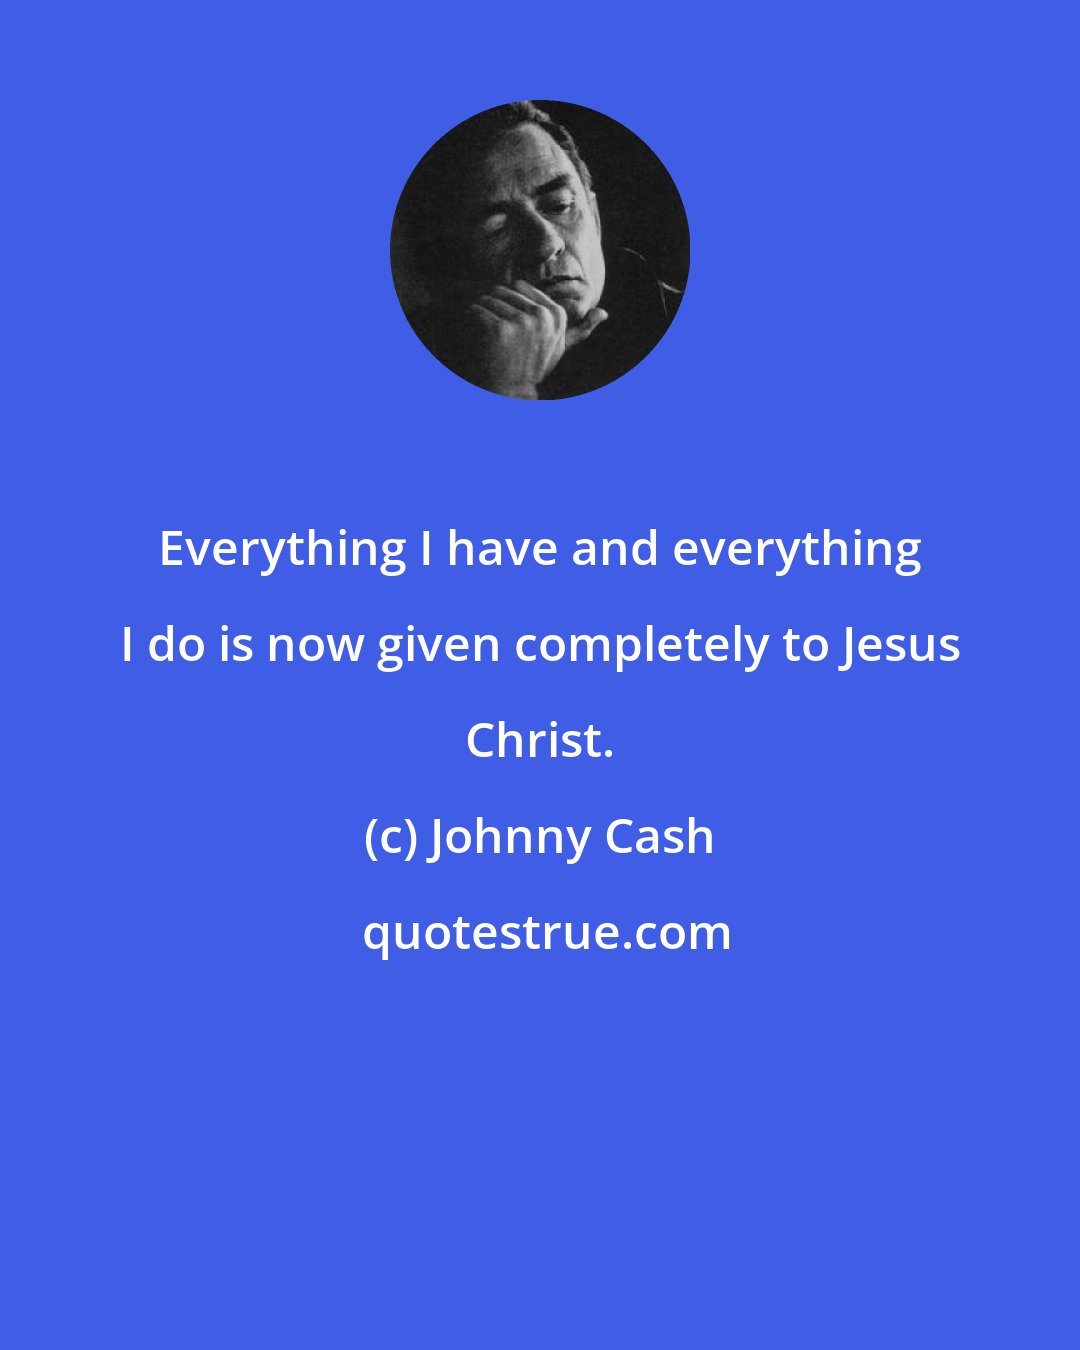 Johnny Cash: Everything I have and everything I do is now given completely to Jesus Christ.